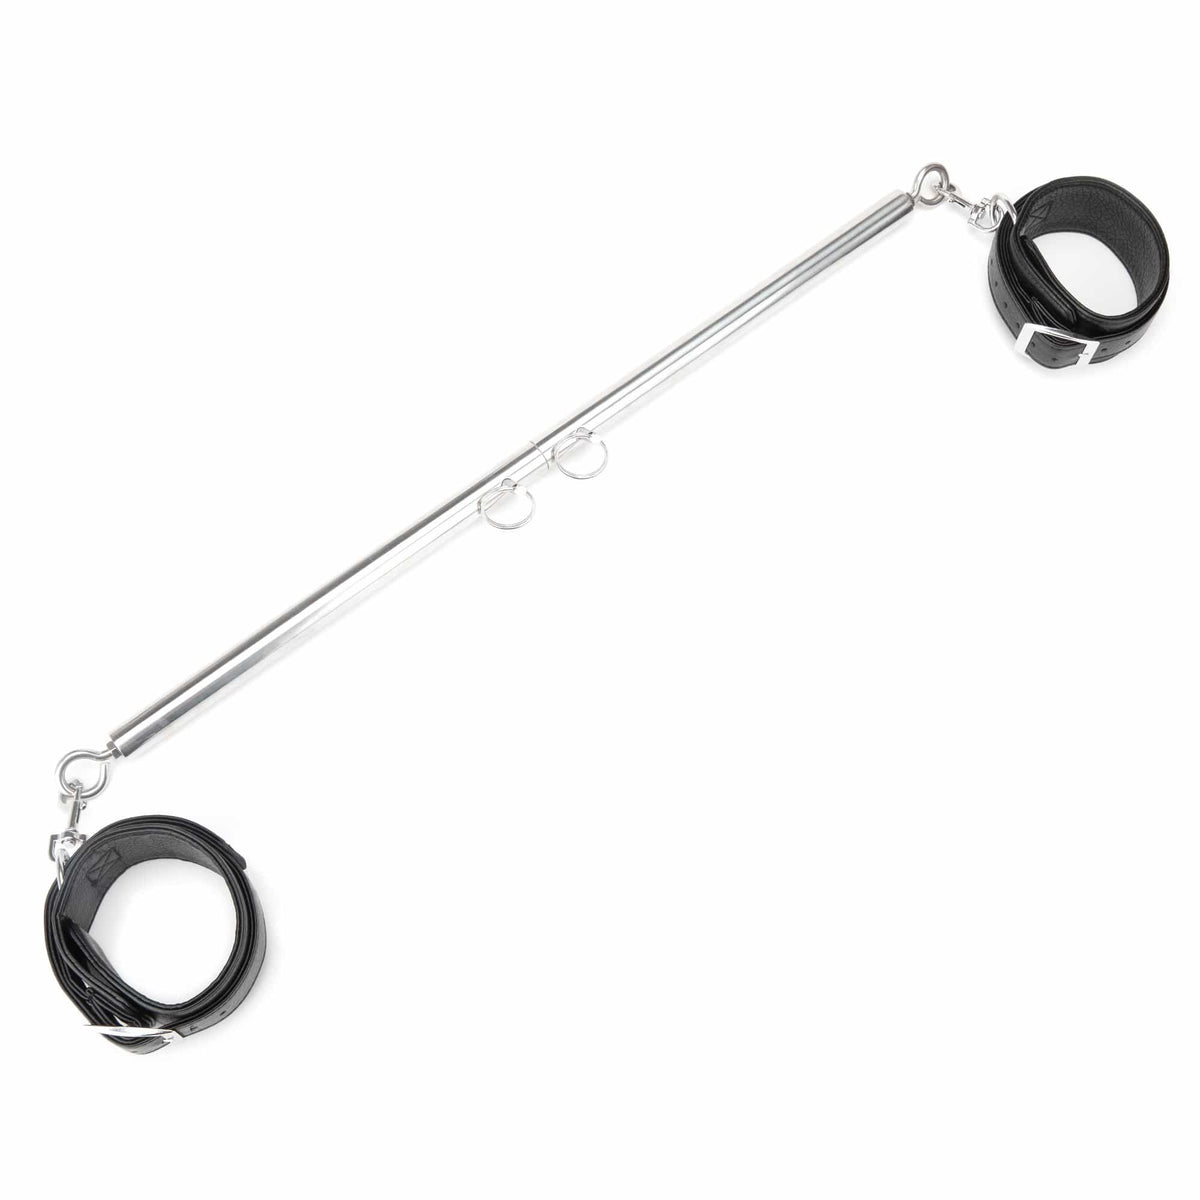 expandable spreader bar set 35 47 with detachable leatherette cuffs